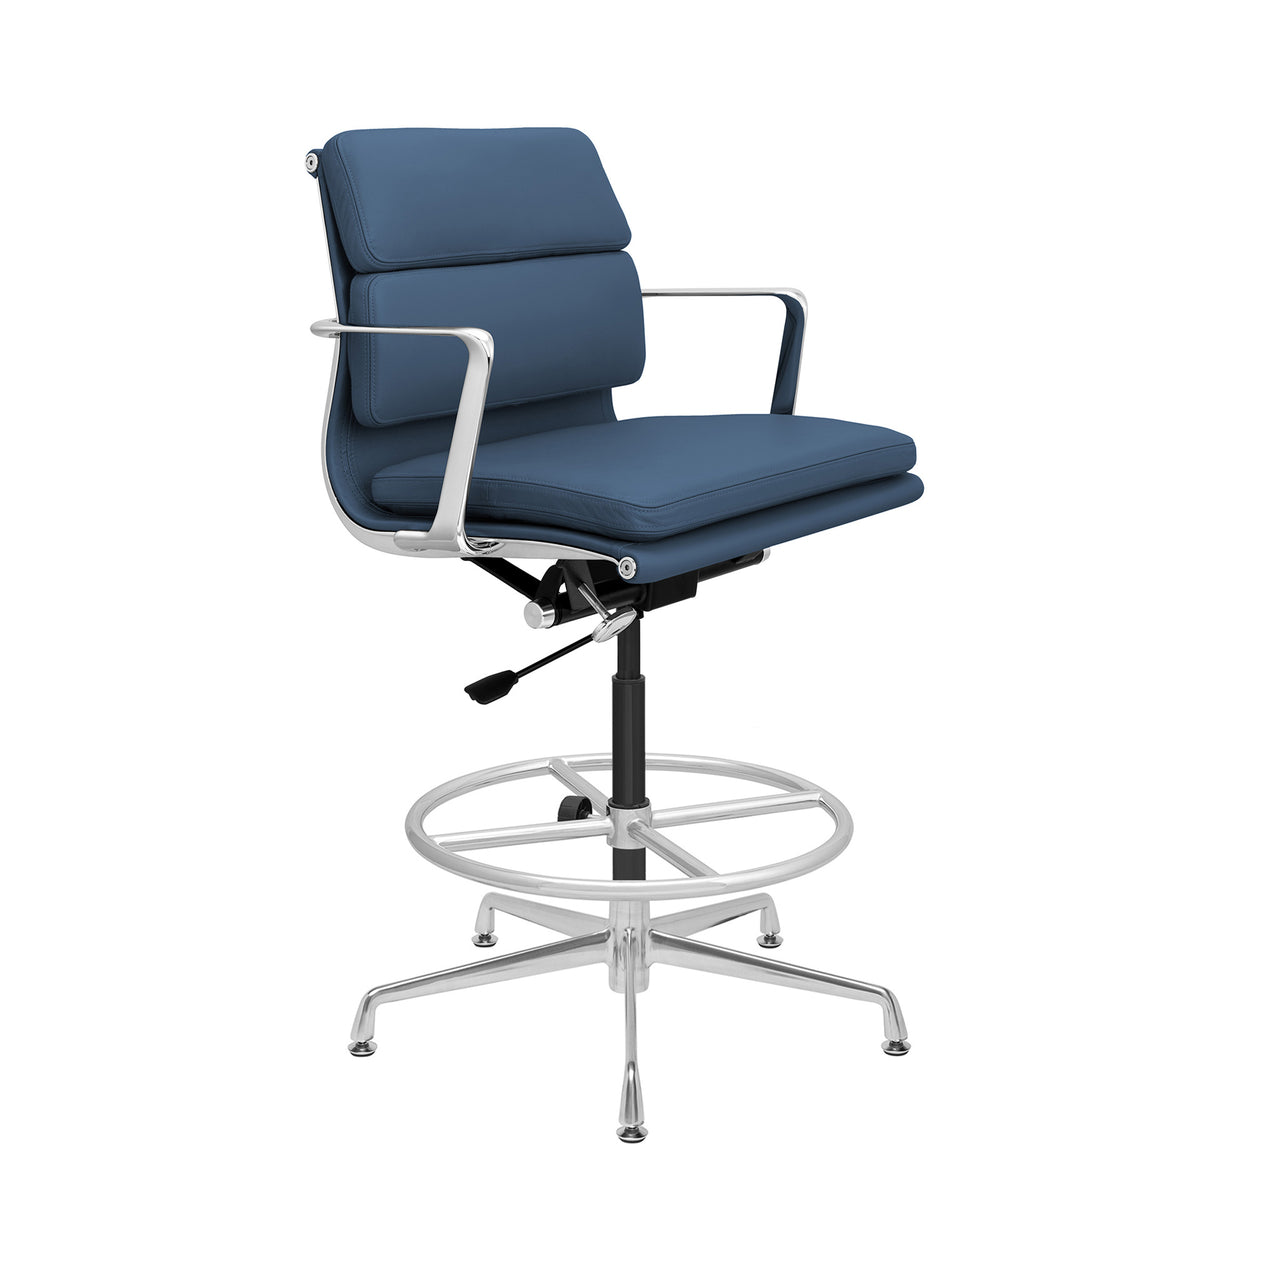 SHIPS FEB 18TH - Pro Soft Pad Drafting Chair (Blue Italian Leather)